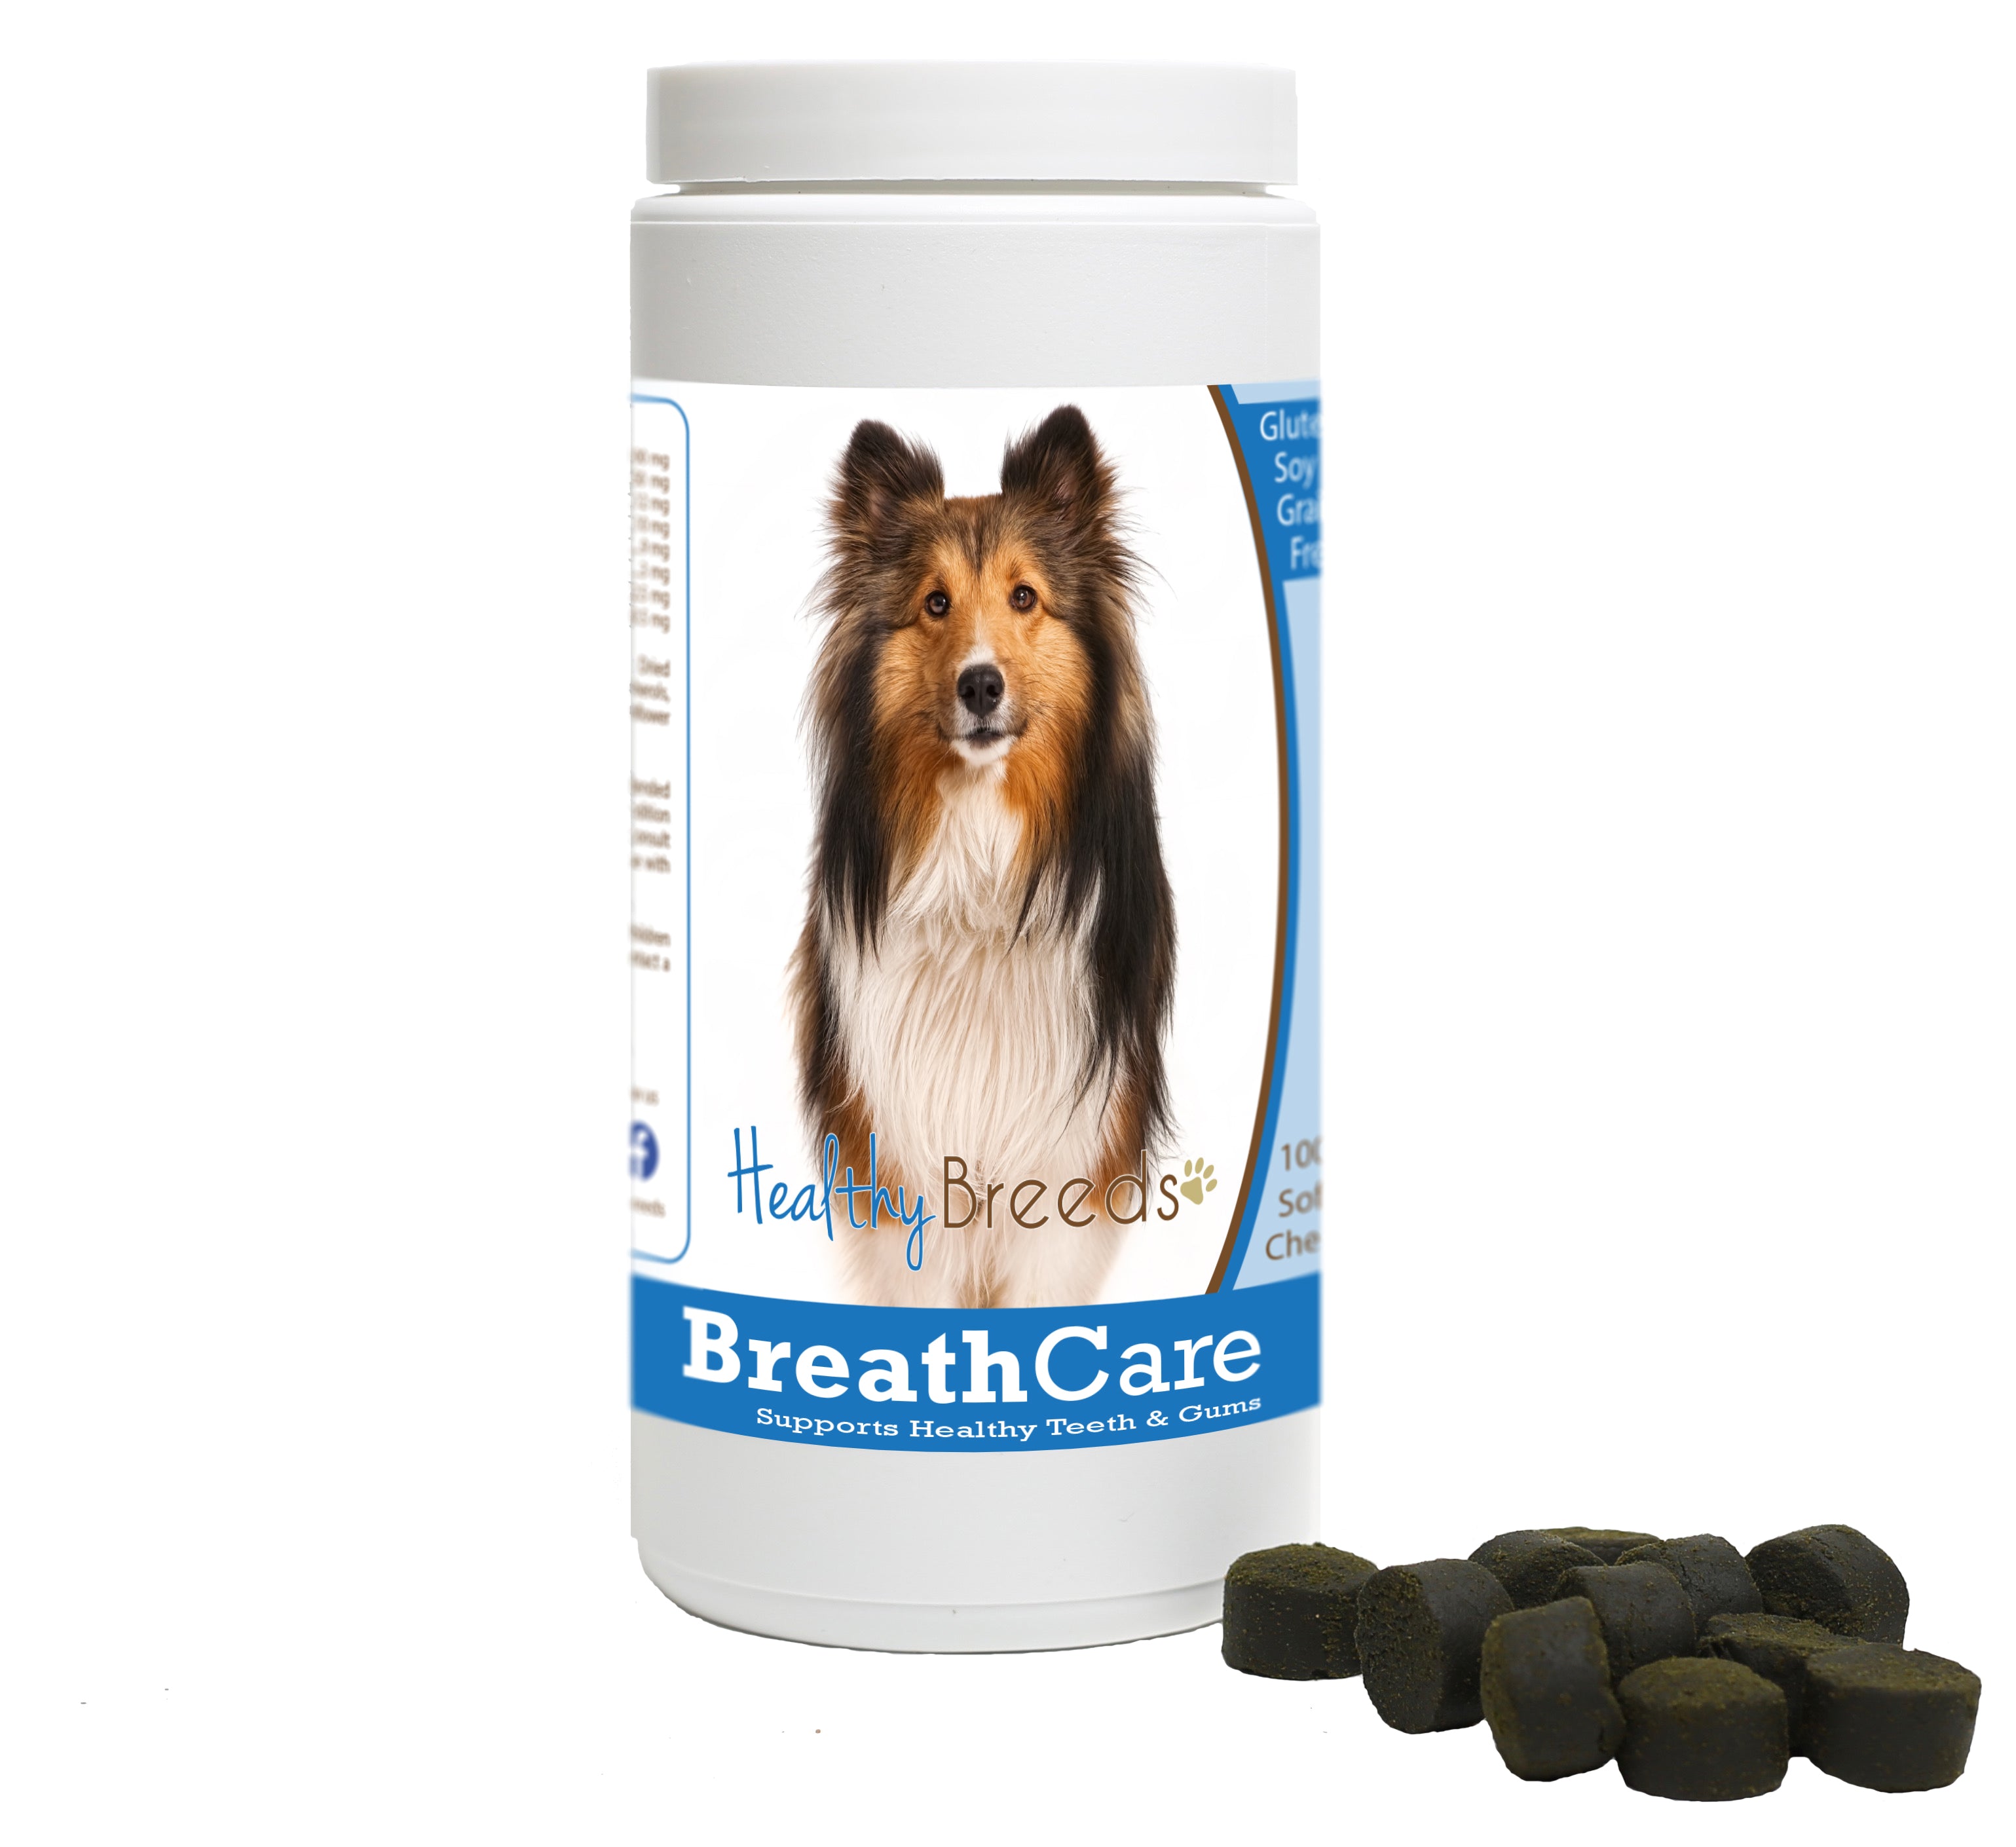 Shetland Sheepdog Breath Care Soft Chews for Dogs 60 Count